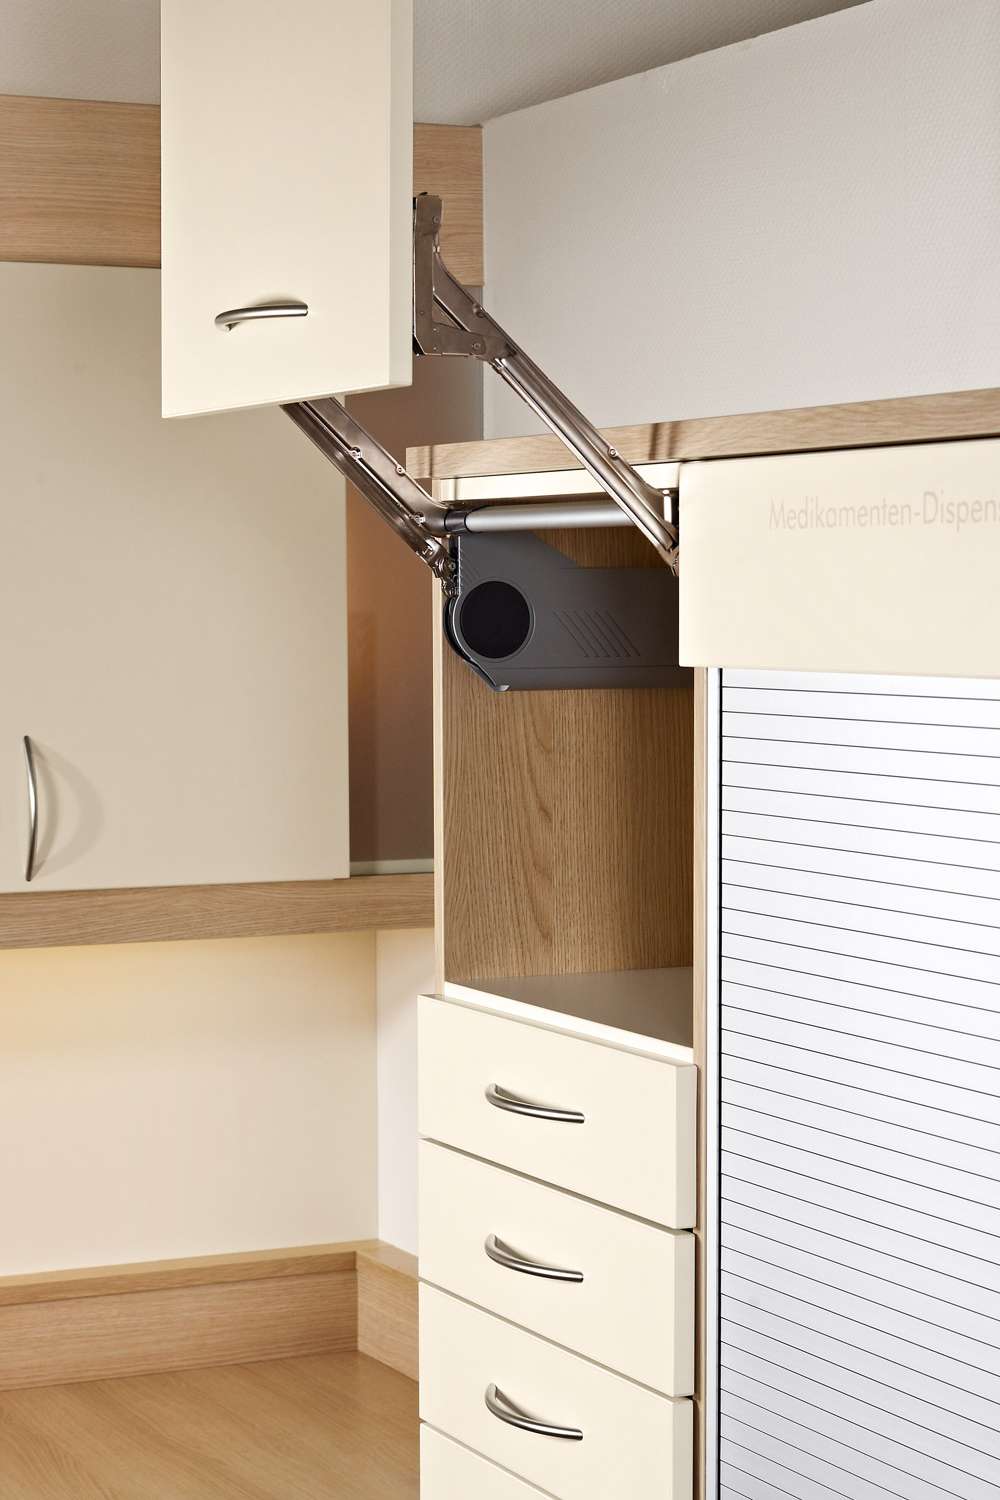 Space-saving cupboard doors for contract furniture